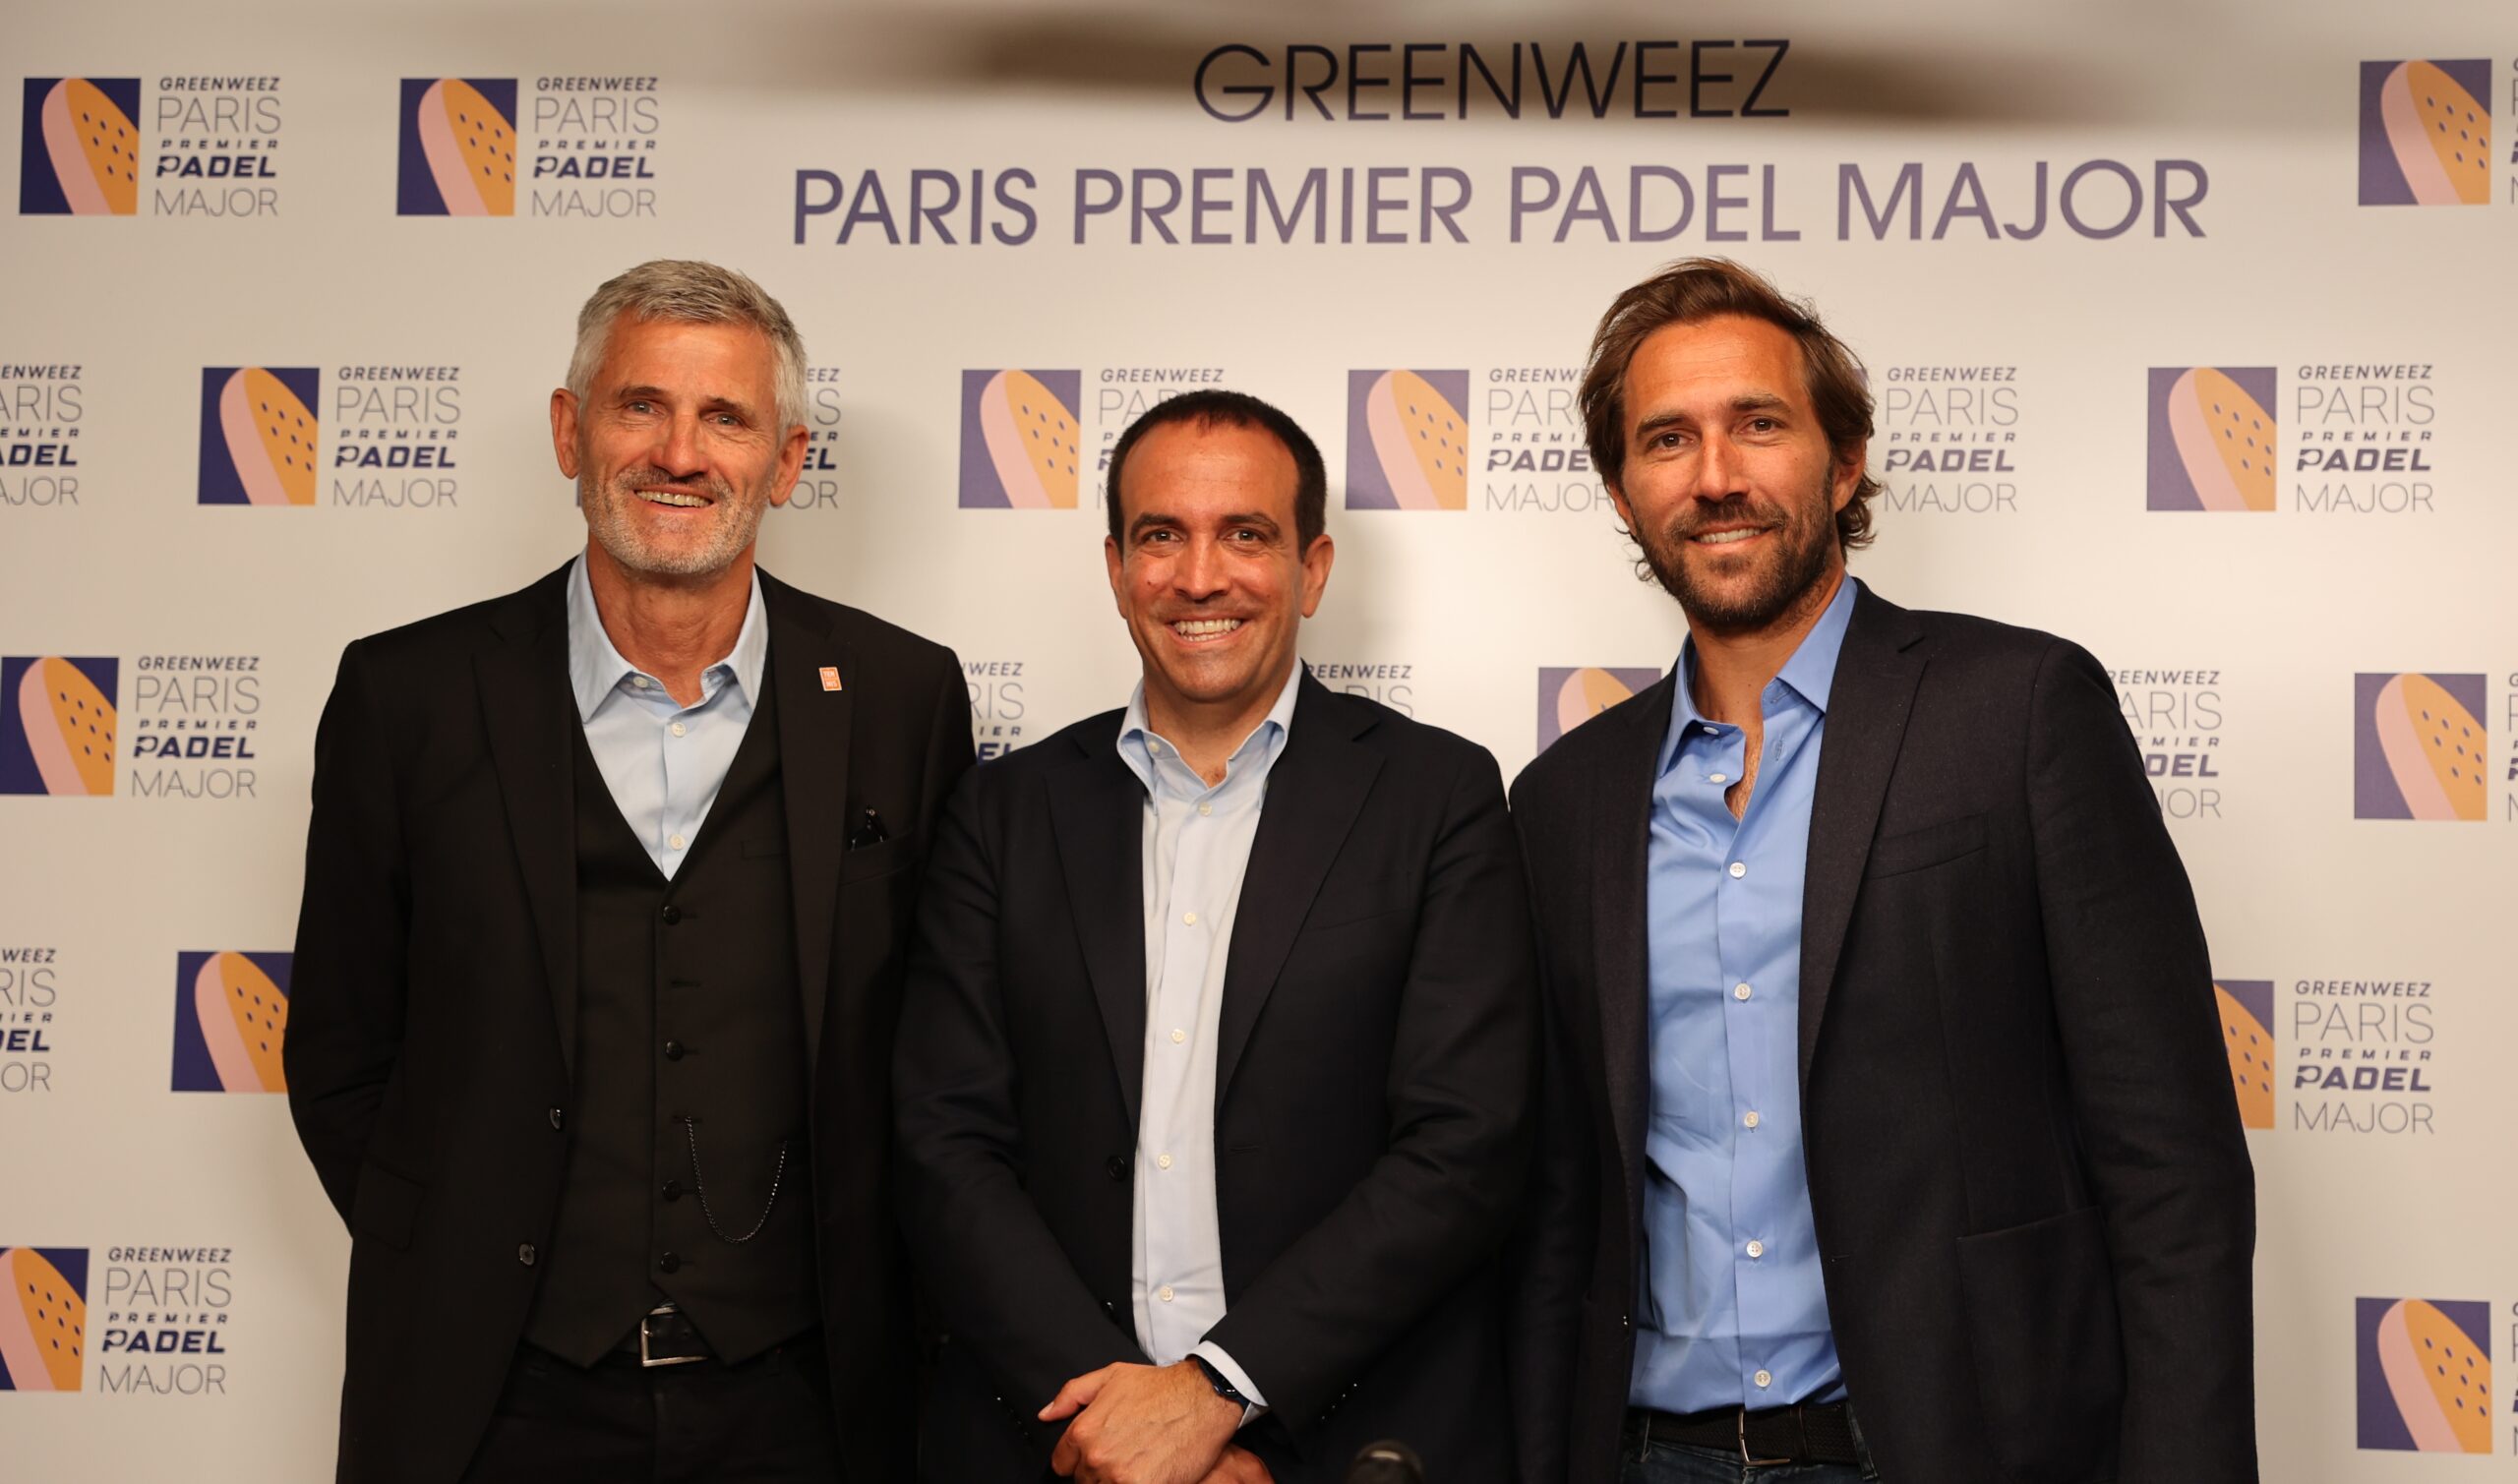 The Roland-Garros stadium ready to welcome the Greenweez Paris Premier Padel Major